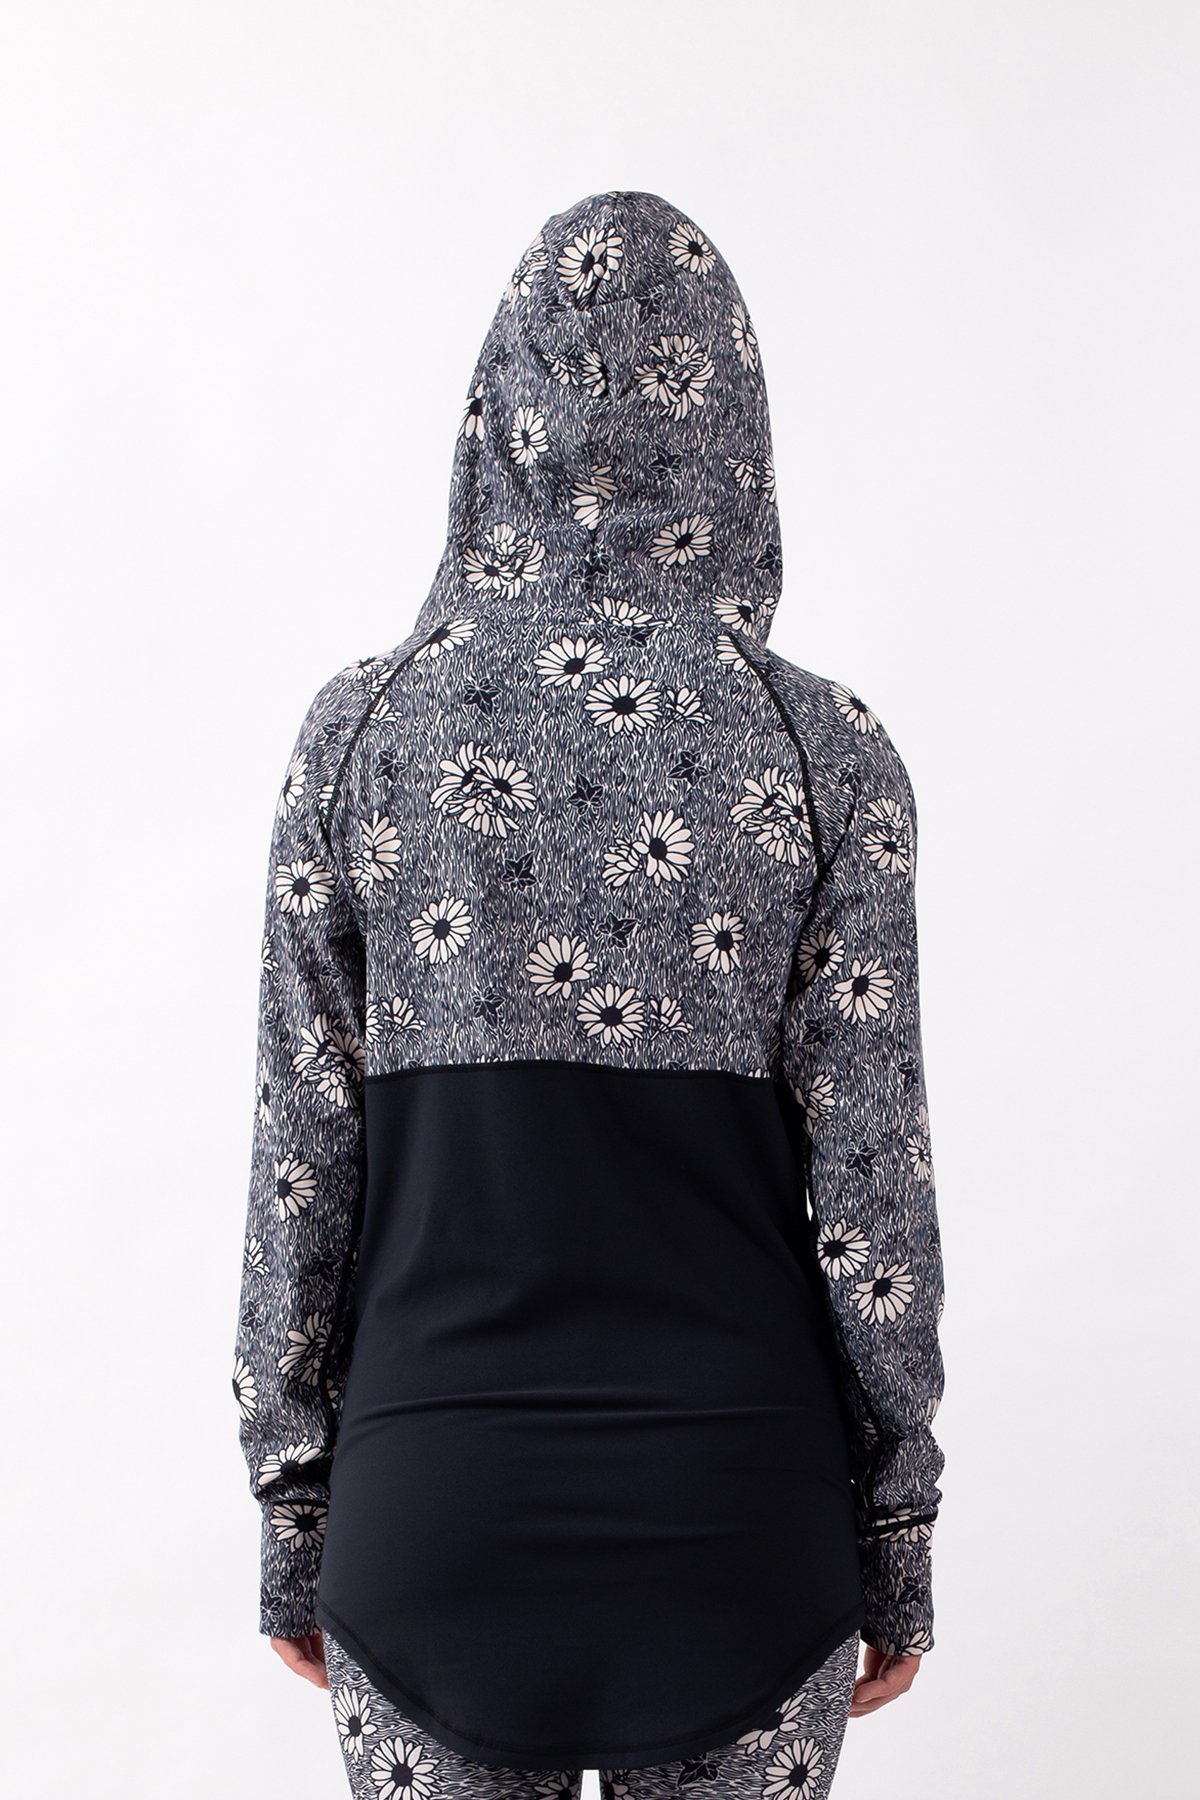 Base Layer | Icecold Hoodie Top - Ivy Blossom